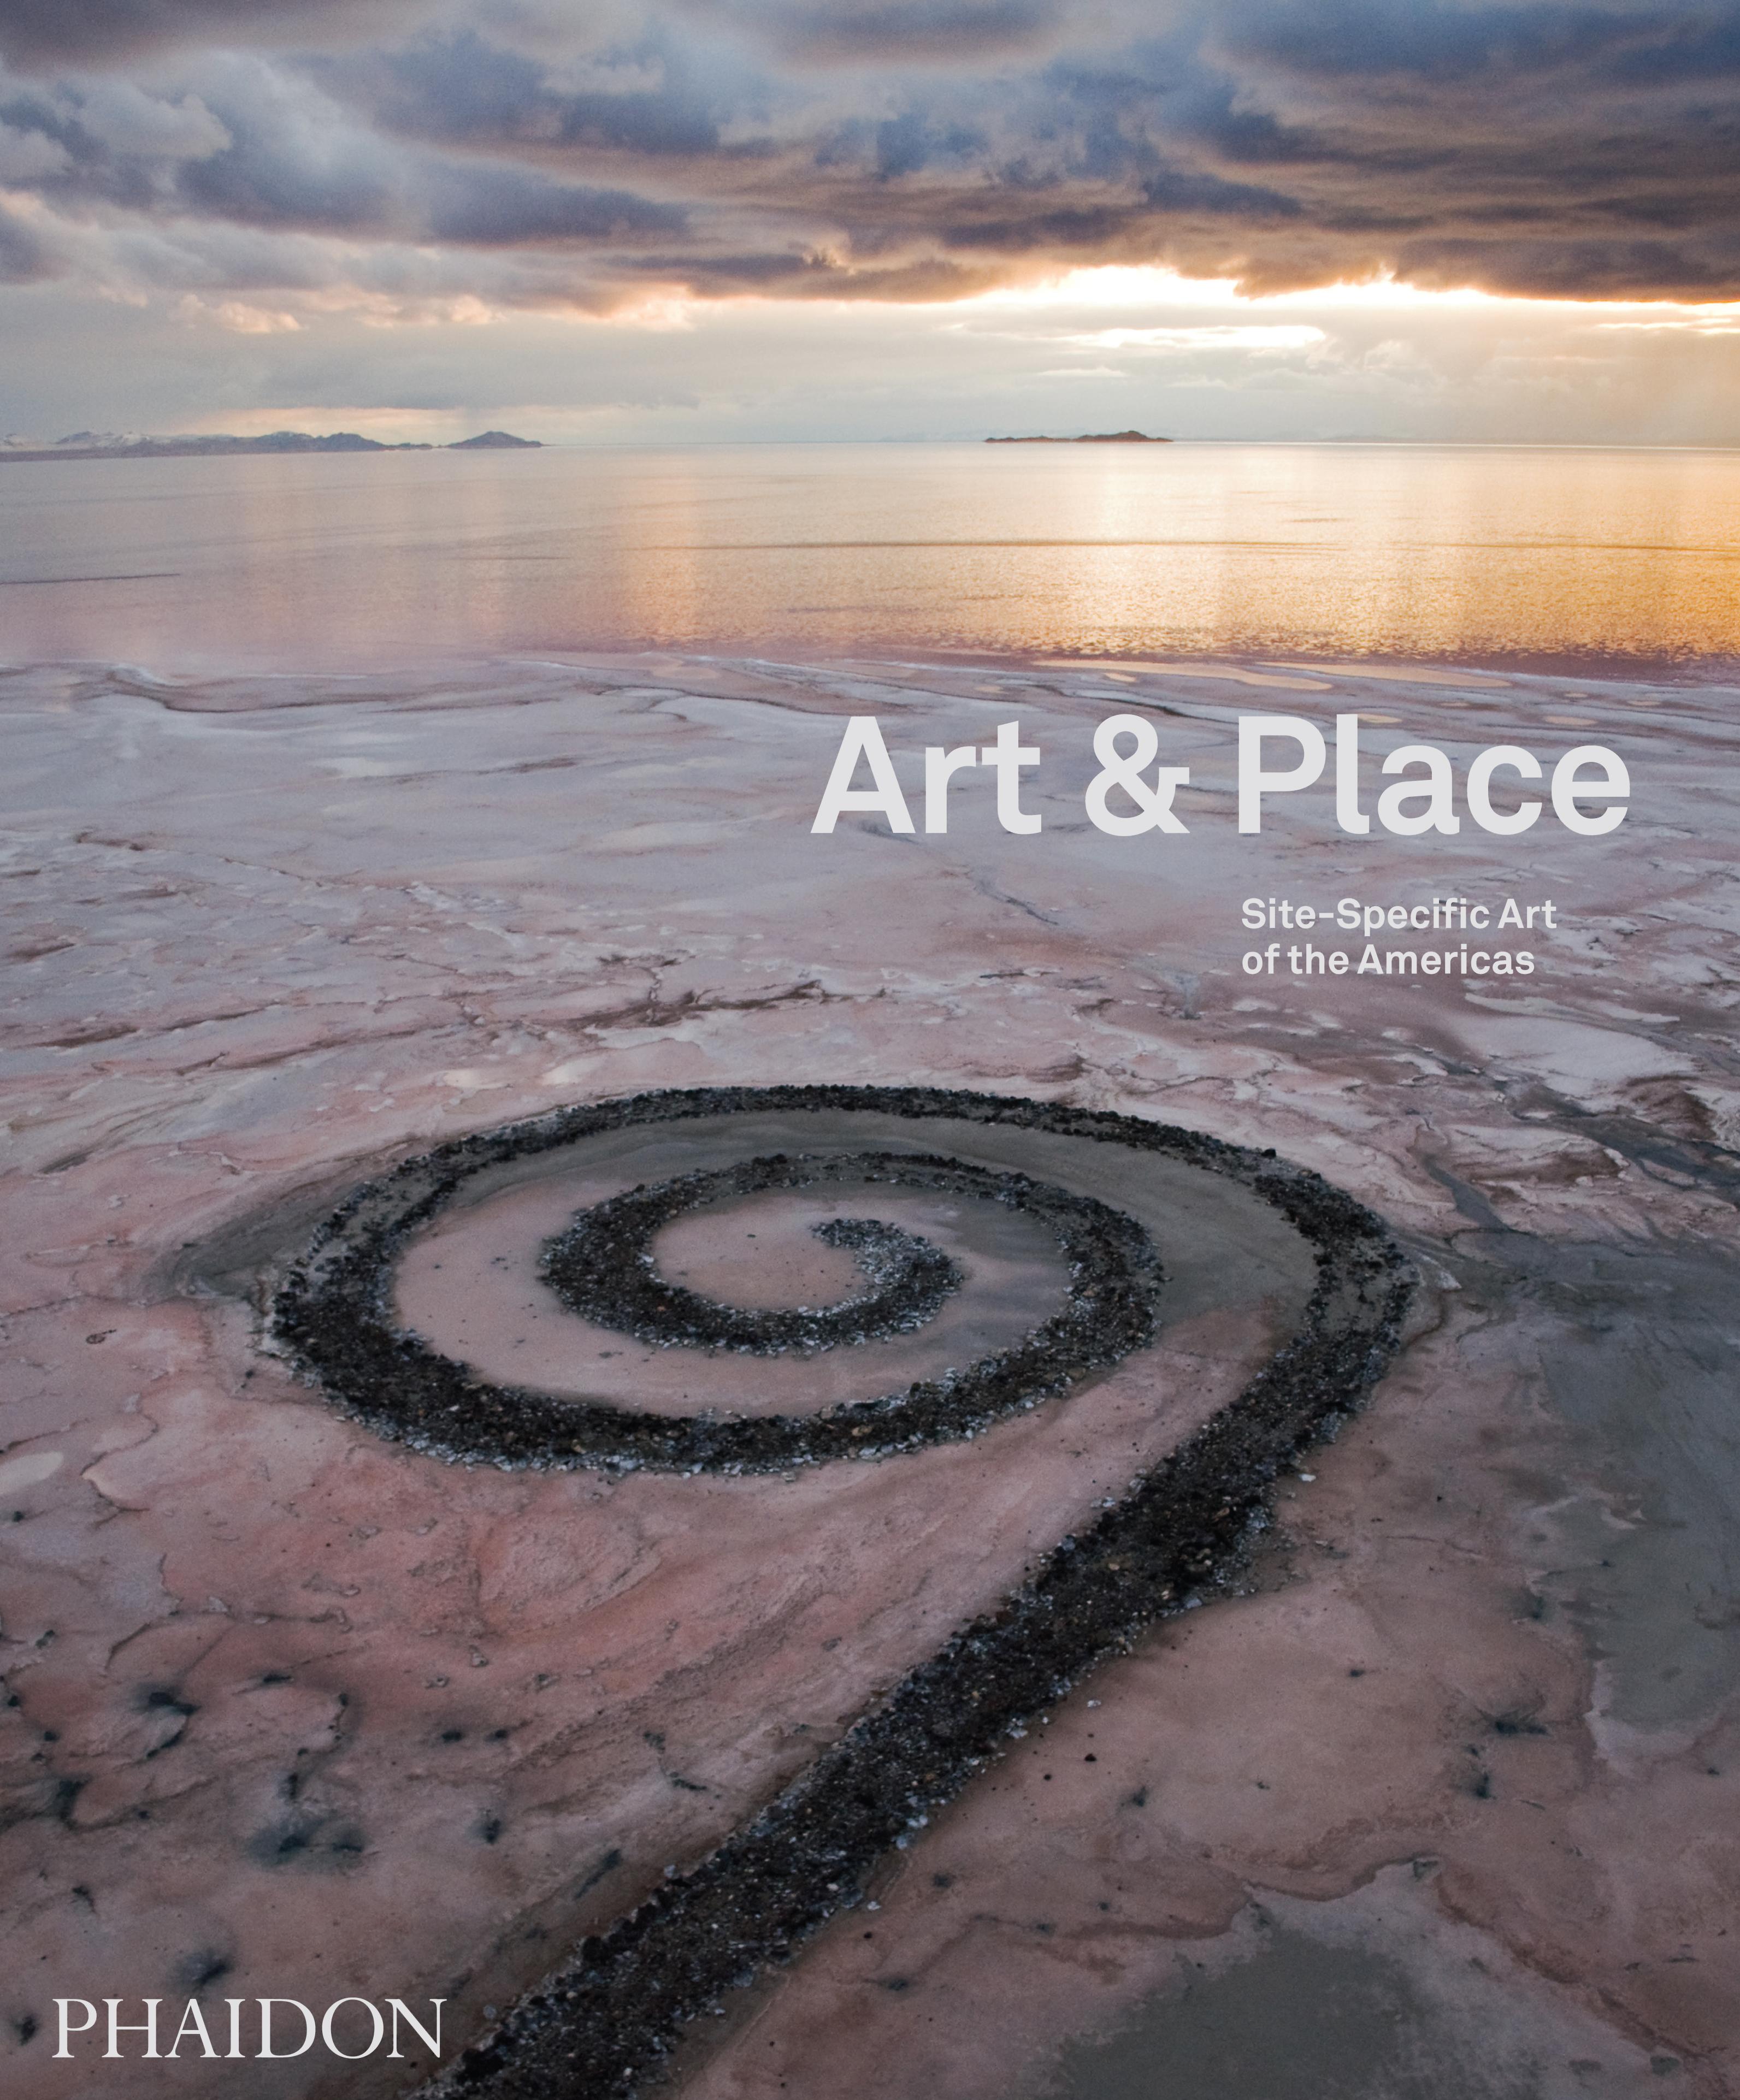 European Art & Place, Site-specific Art of the Americas Book For Sale